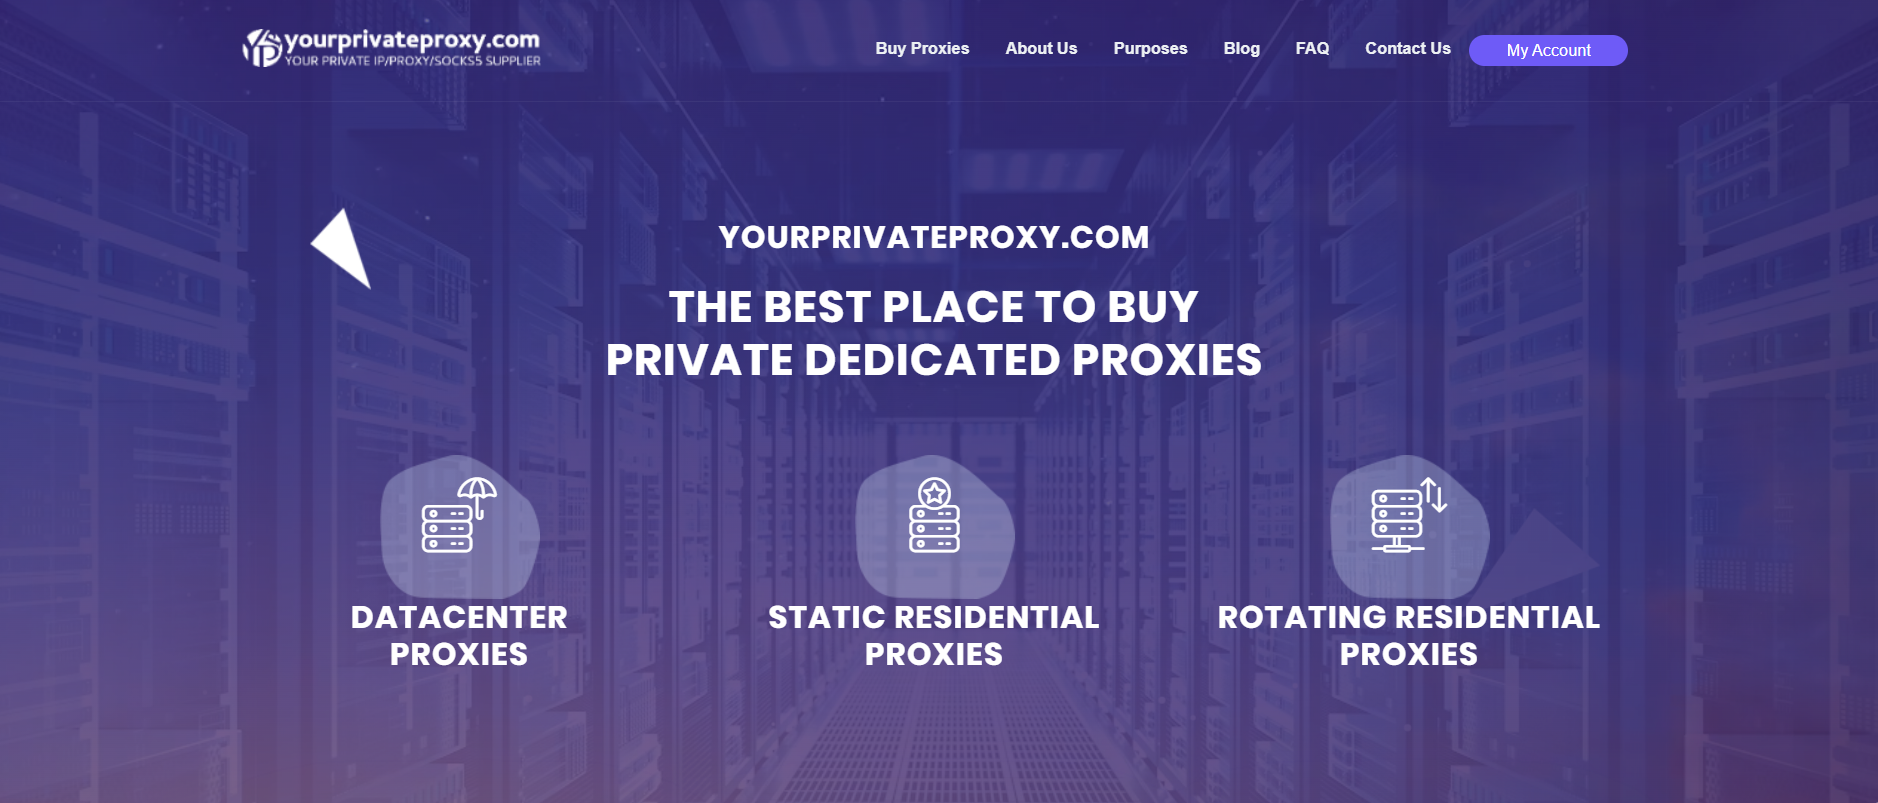 YourPrivateProxy Overview